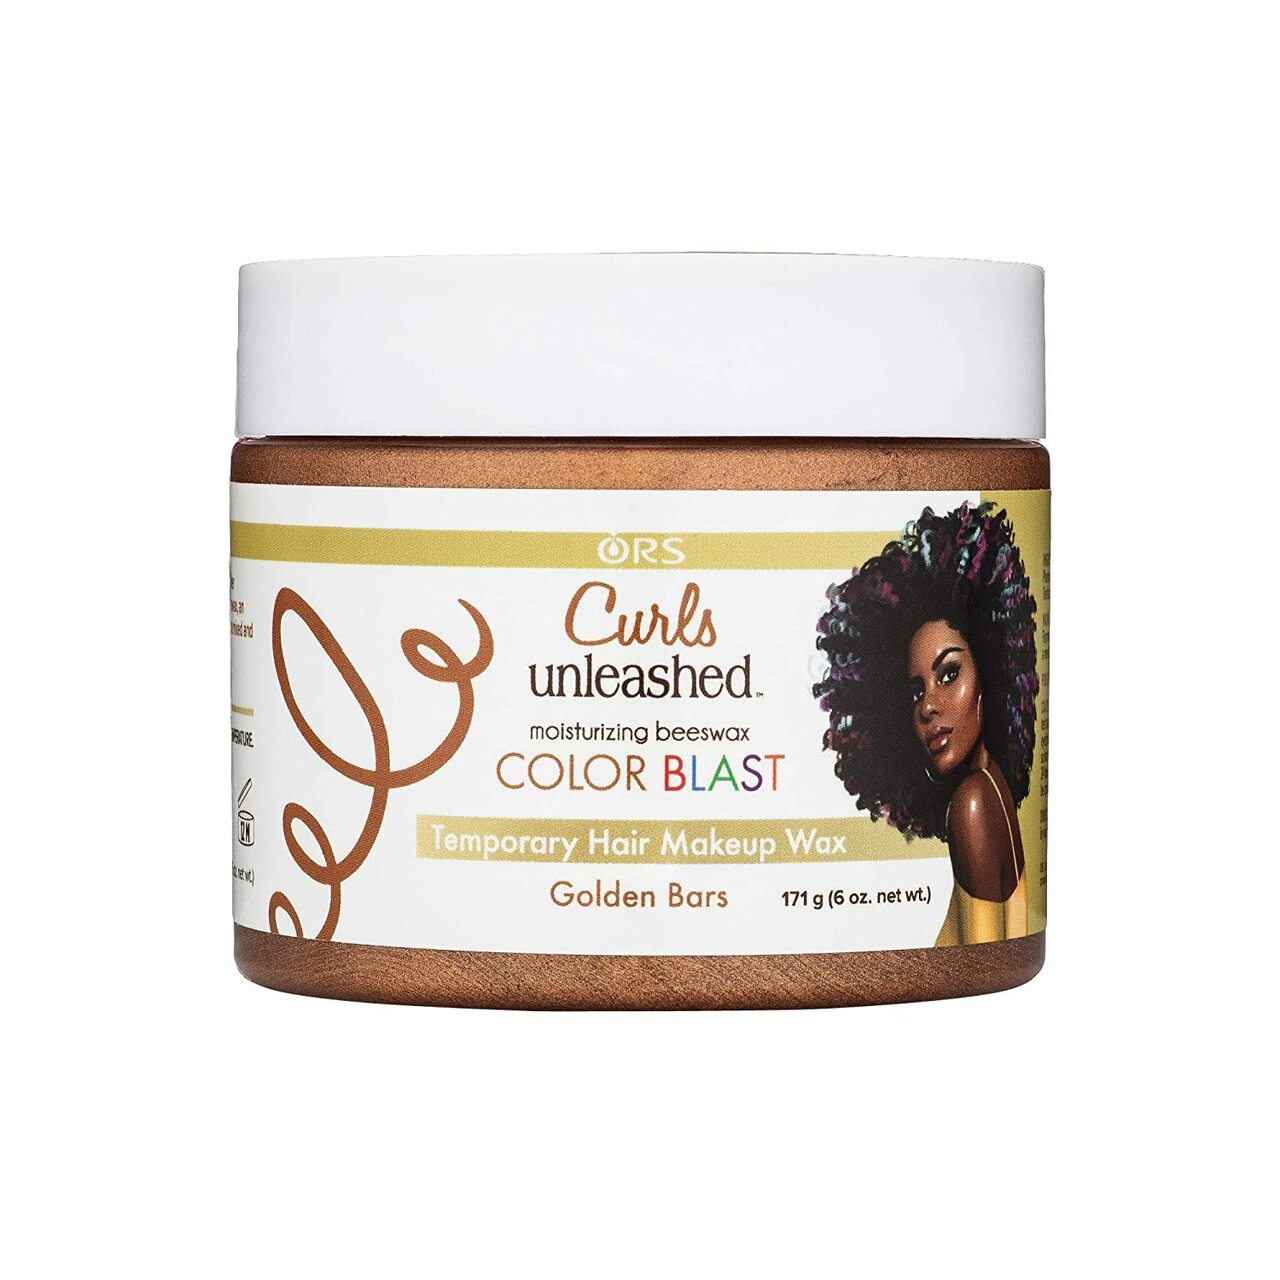 ORS- Curls Unleashed Color Blast Temporary Hair Makeup Wax - Golden Bars 6Oz